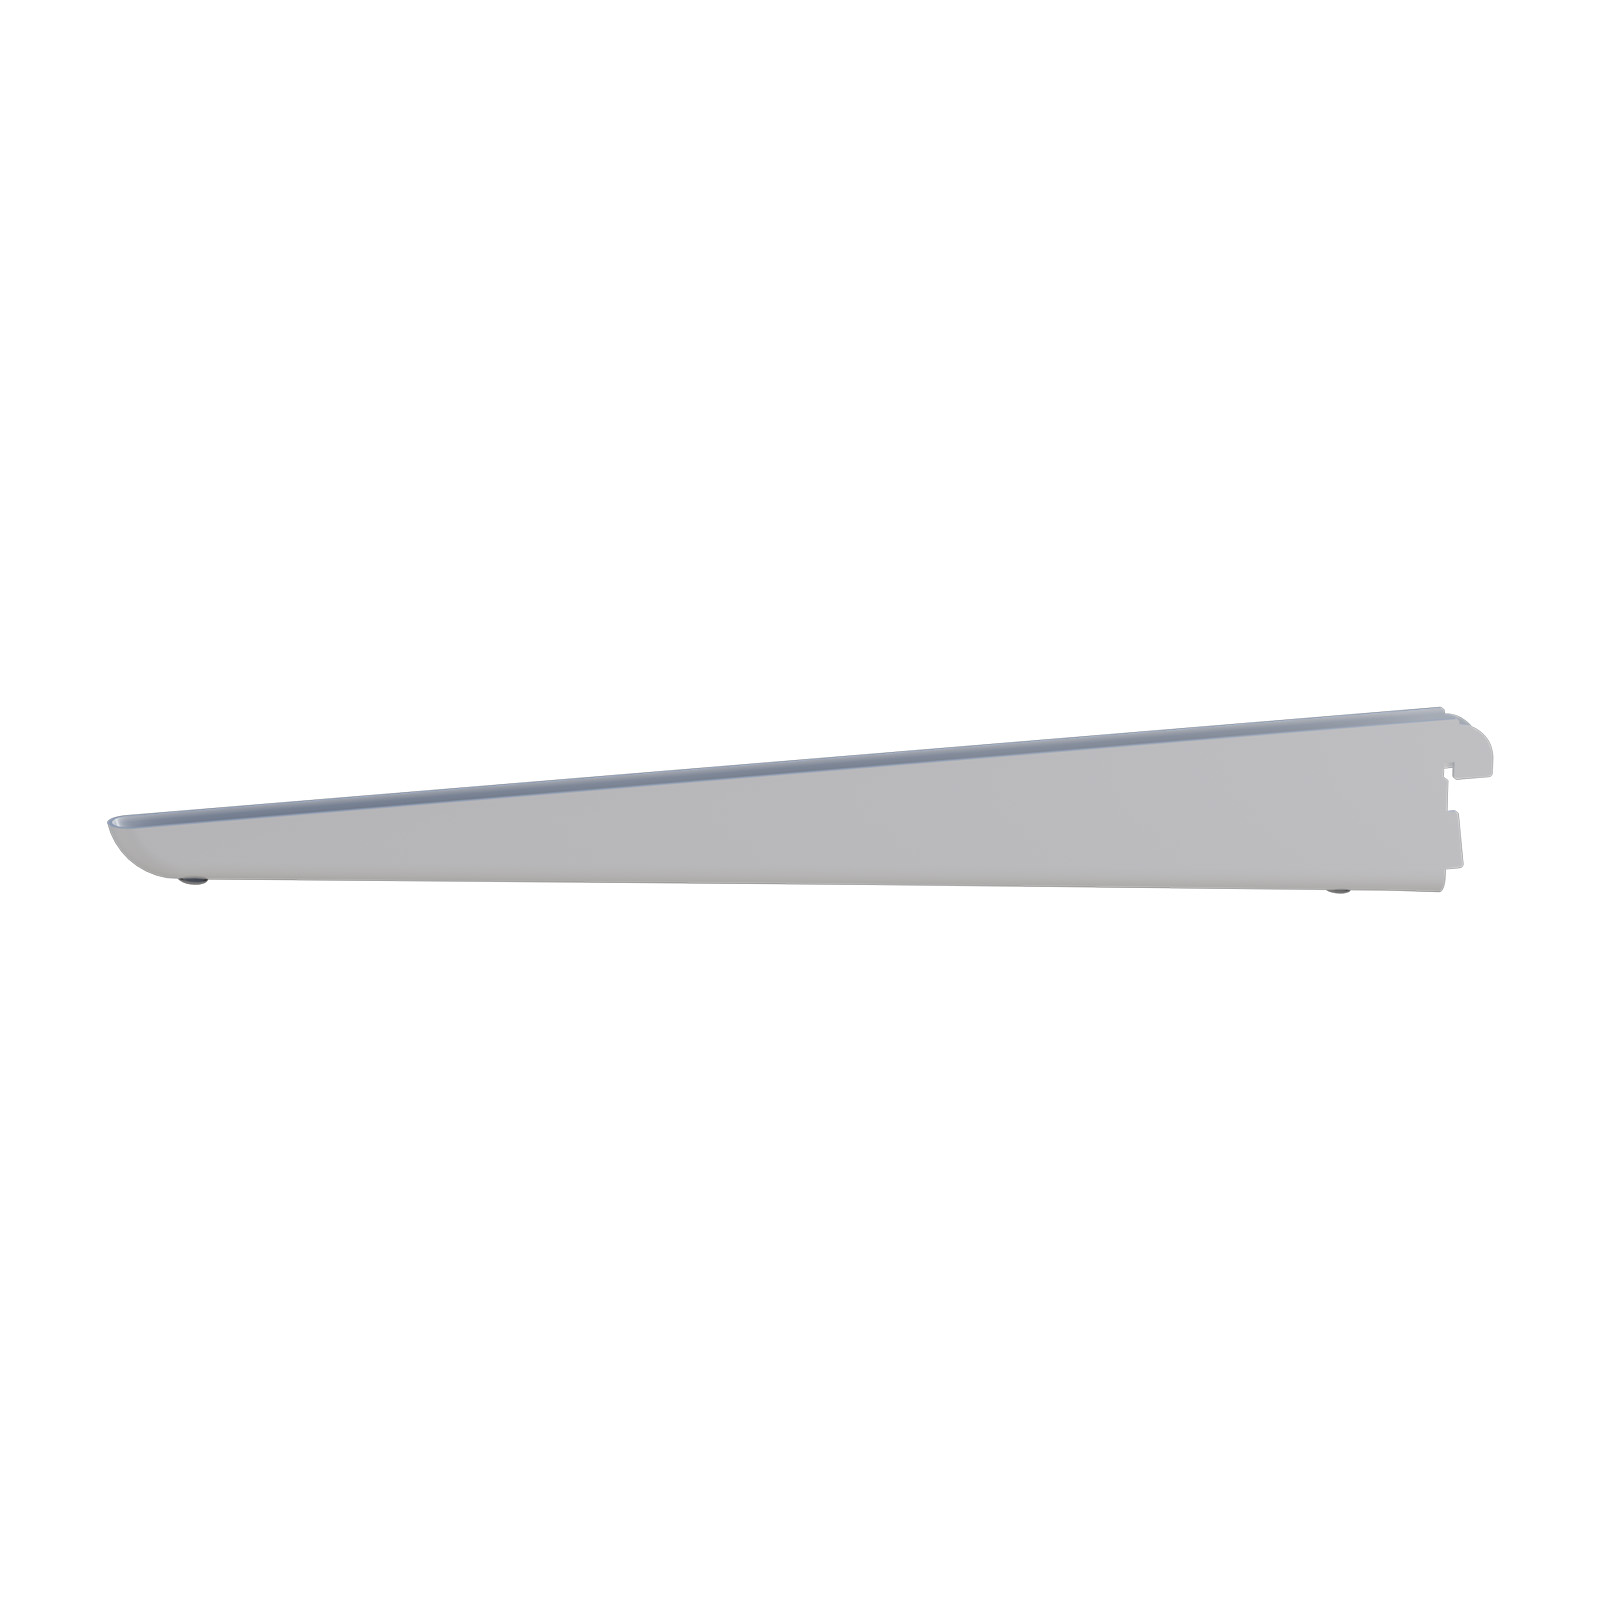 Home Solutions Double Slot Bracket White 360mm